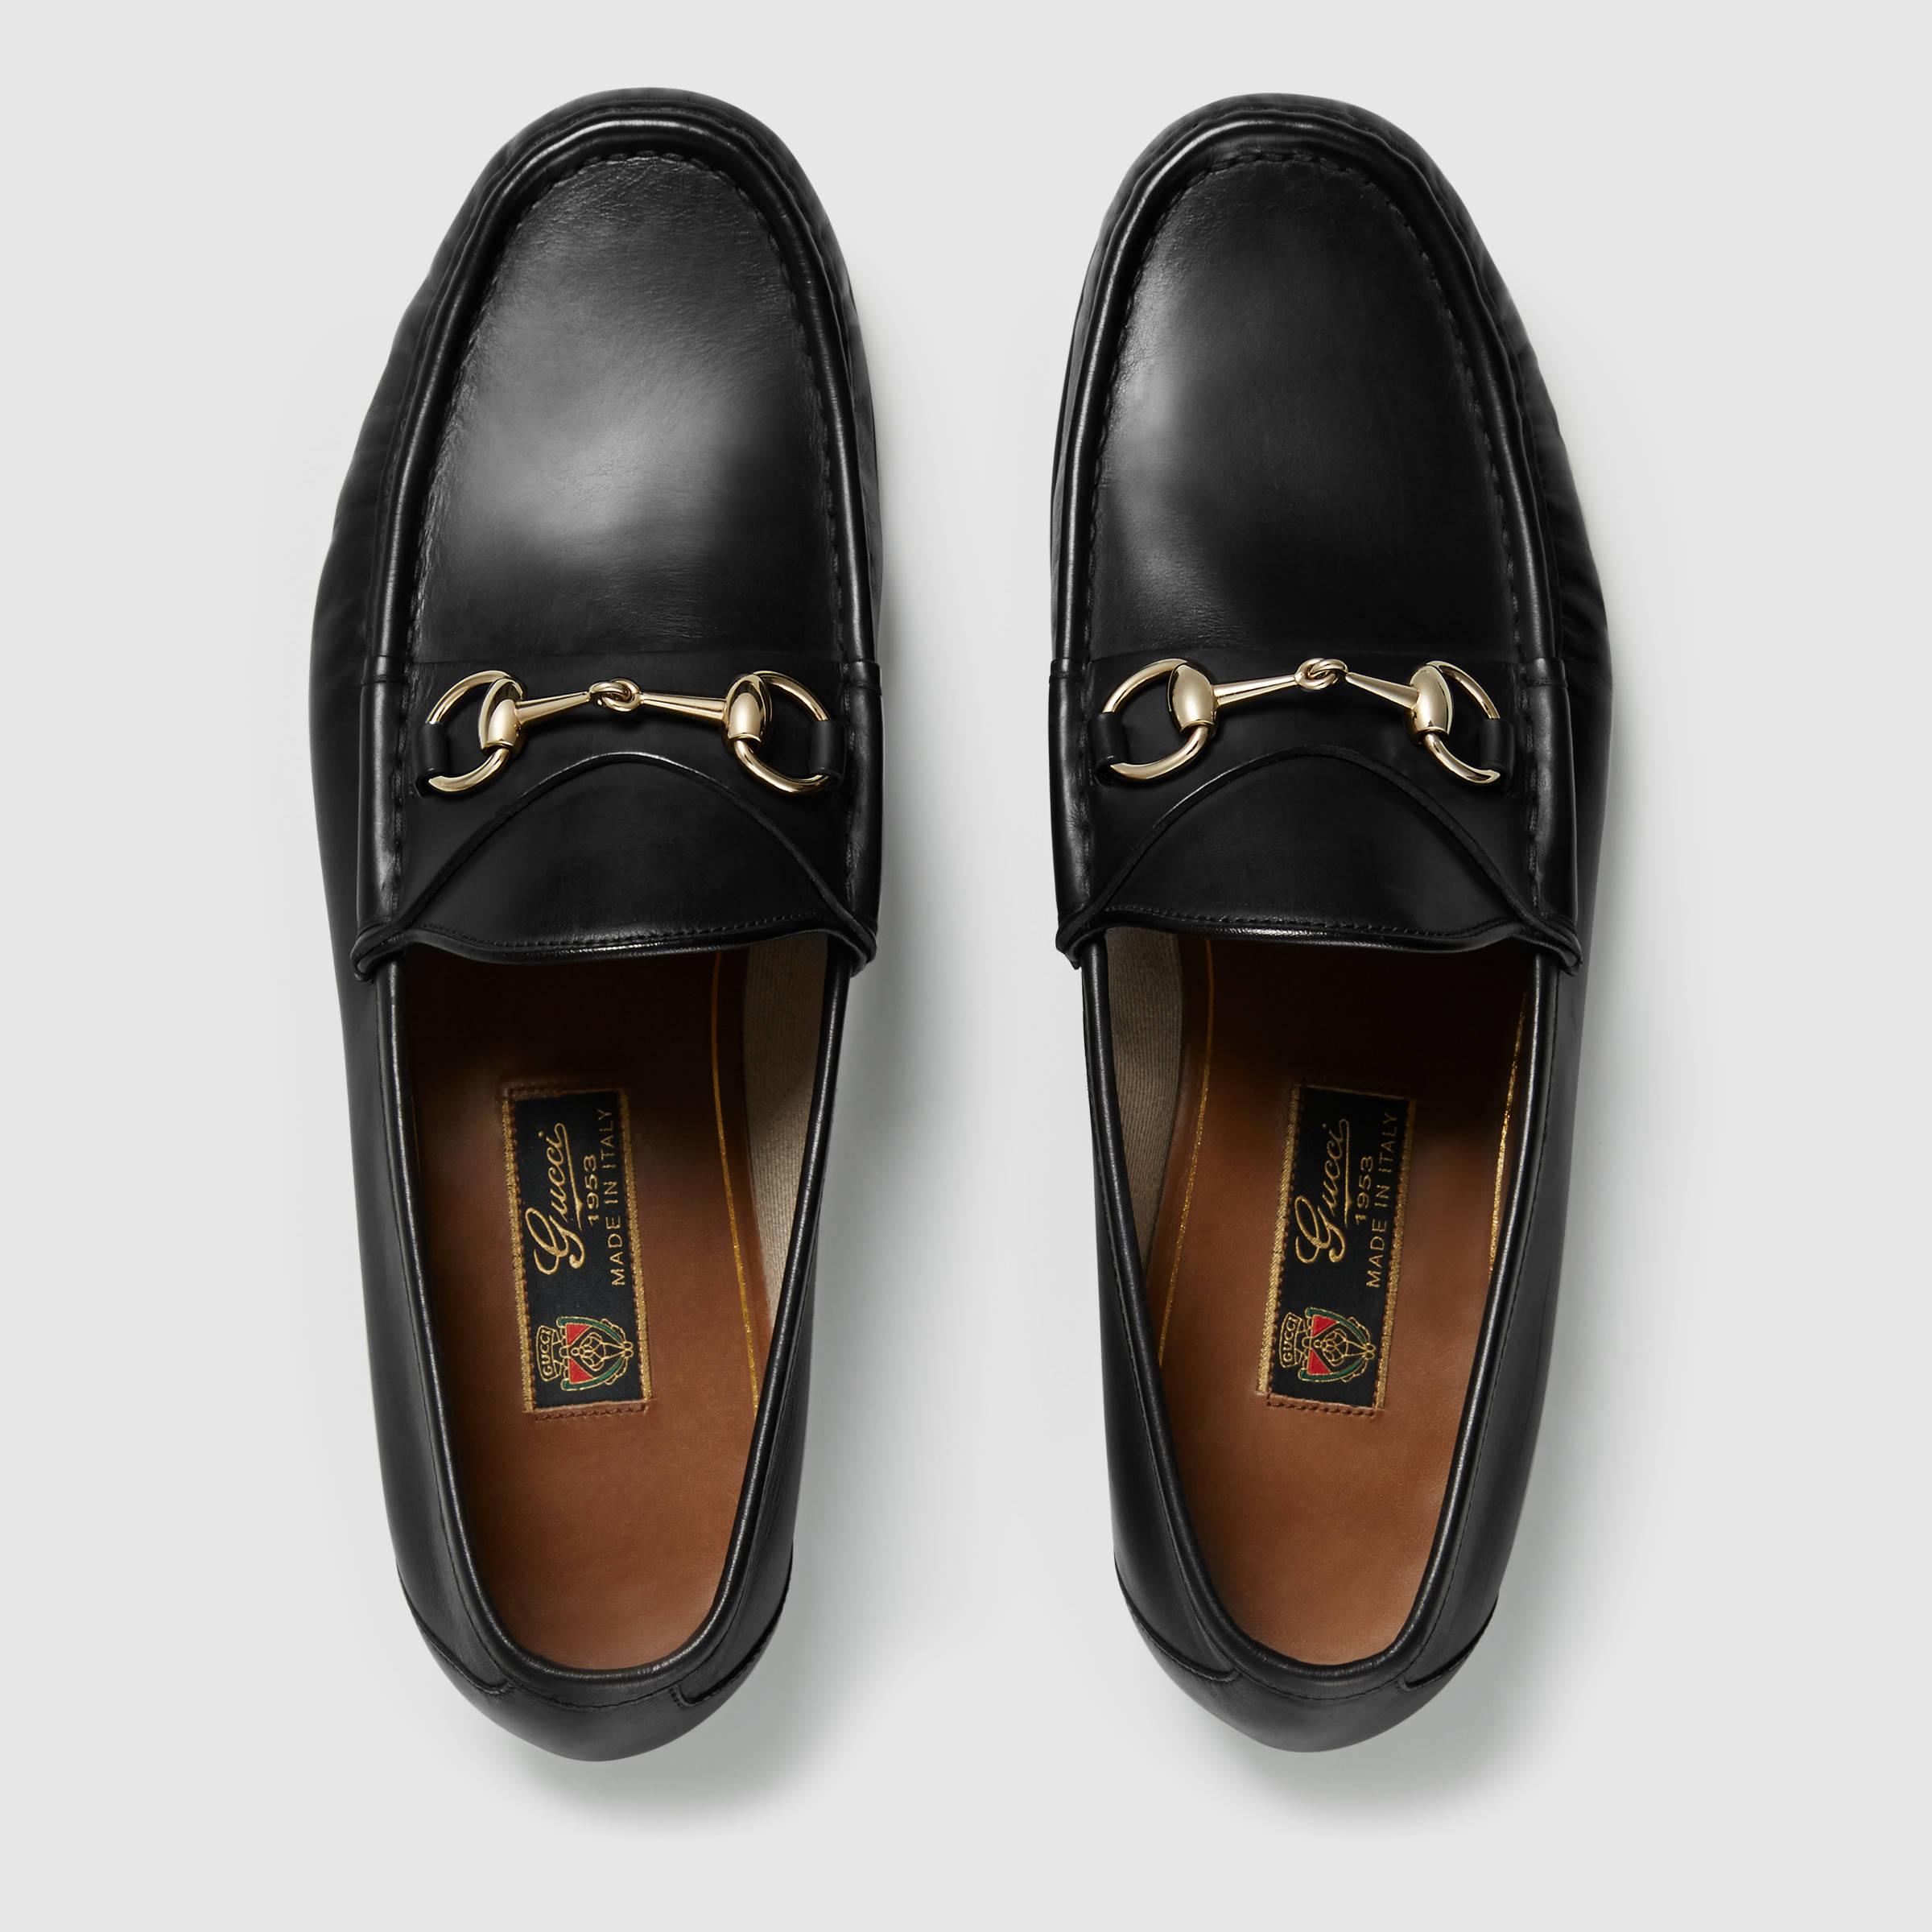 Lyst - Gucci 1953 Horsebit Loafer In Shaded Leather in Black for Men